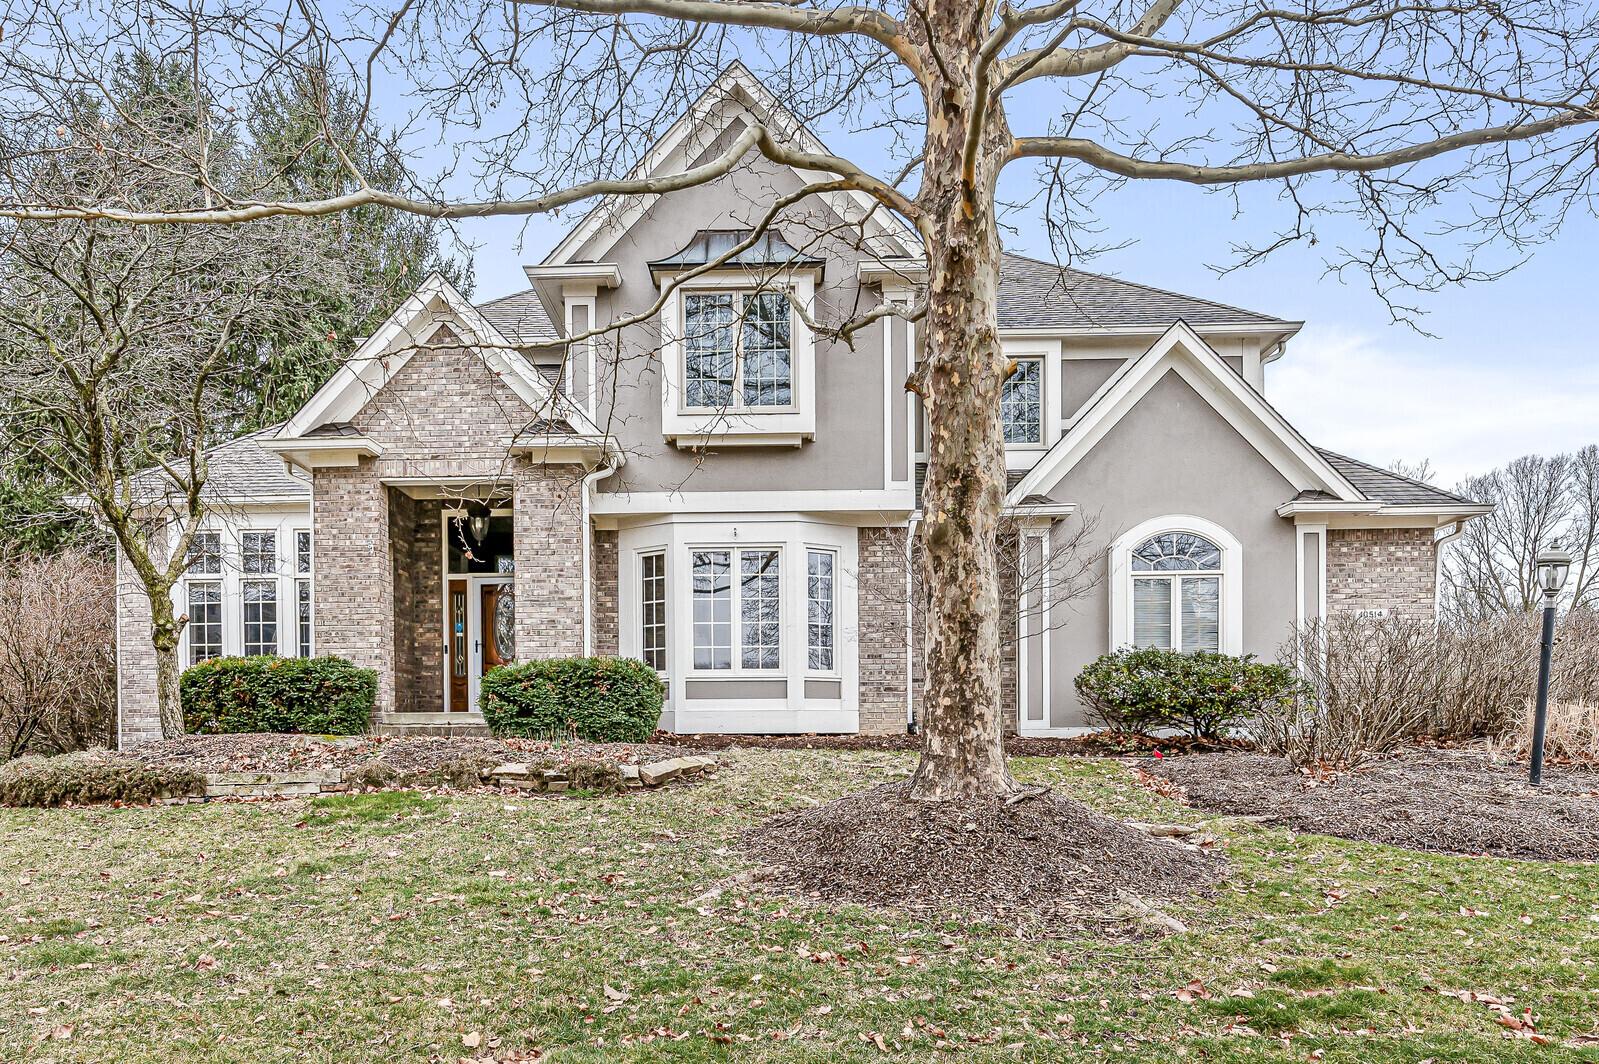 Photo one of 10514 Chestnut Hill Cir Fishers IN 46037 | MLS 21965559